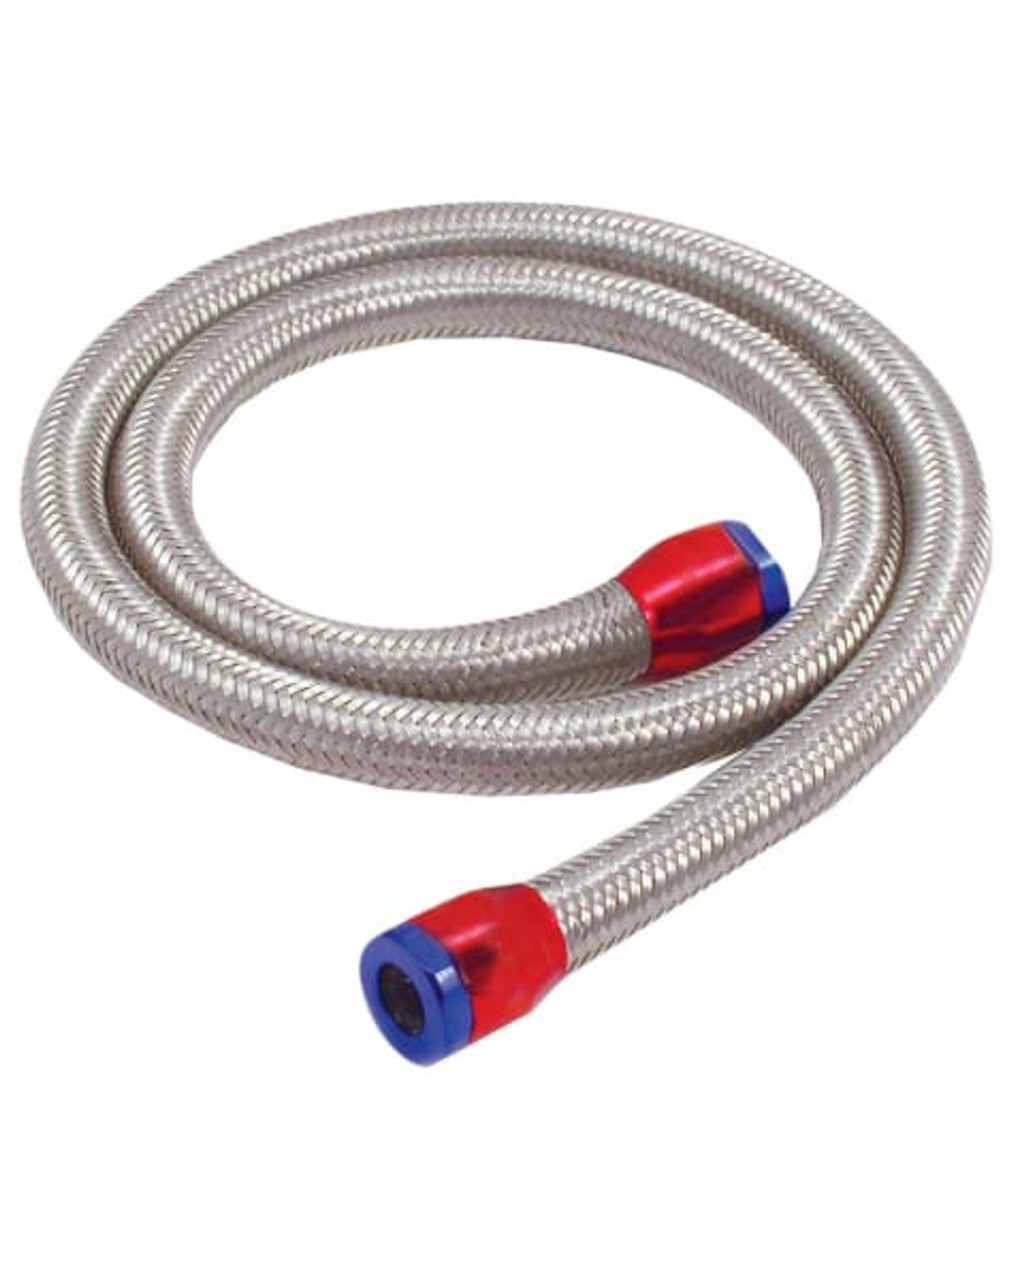 FUEL LINE KIT 5/16 S/S BRAIDED 3FT